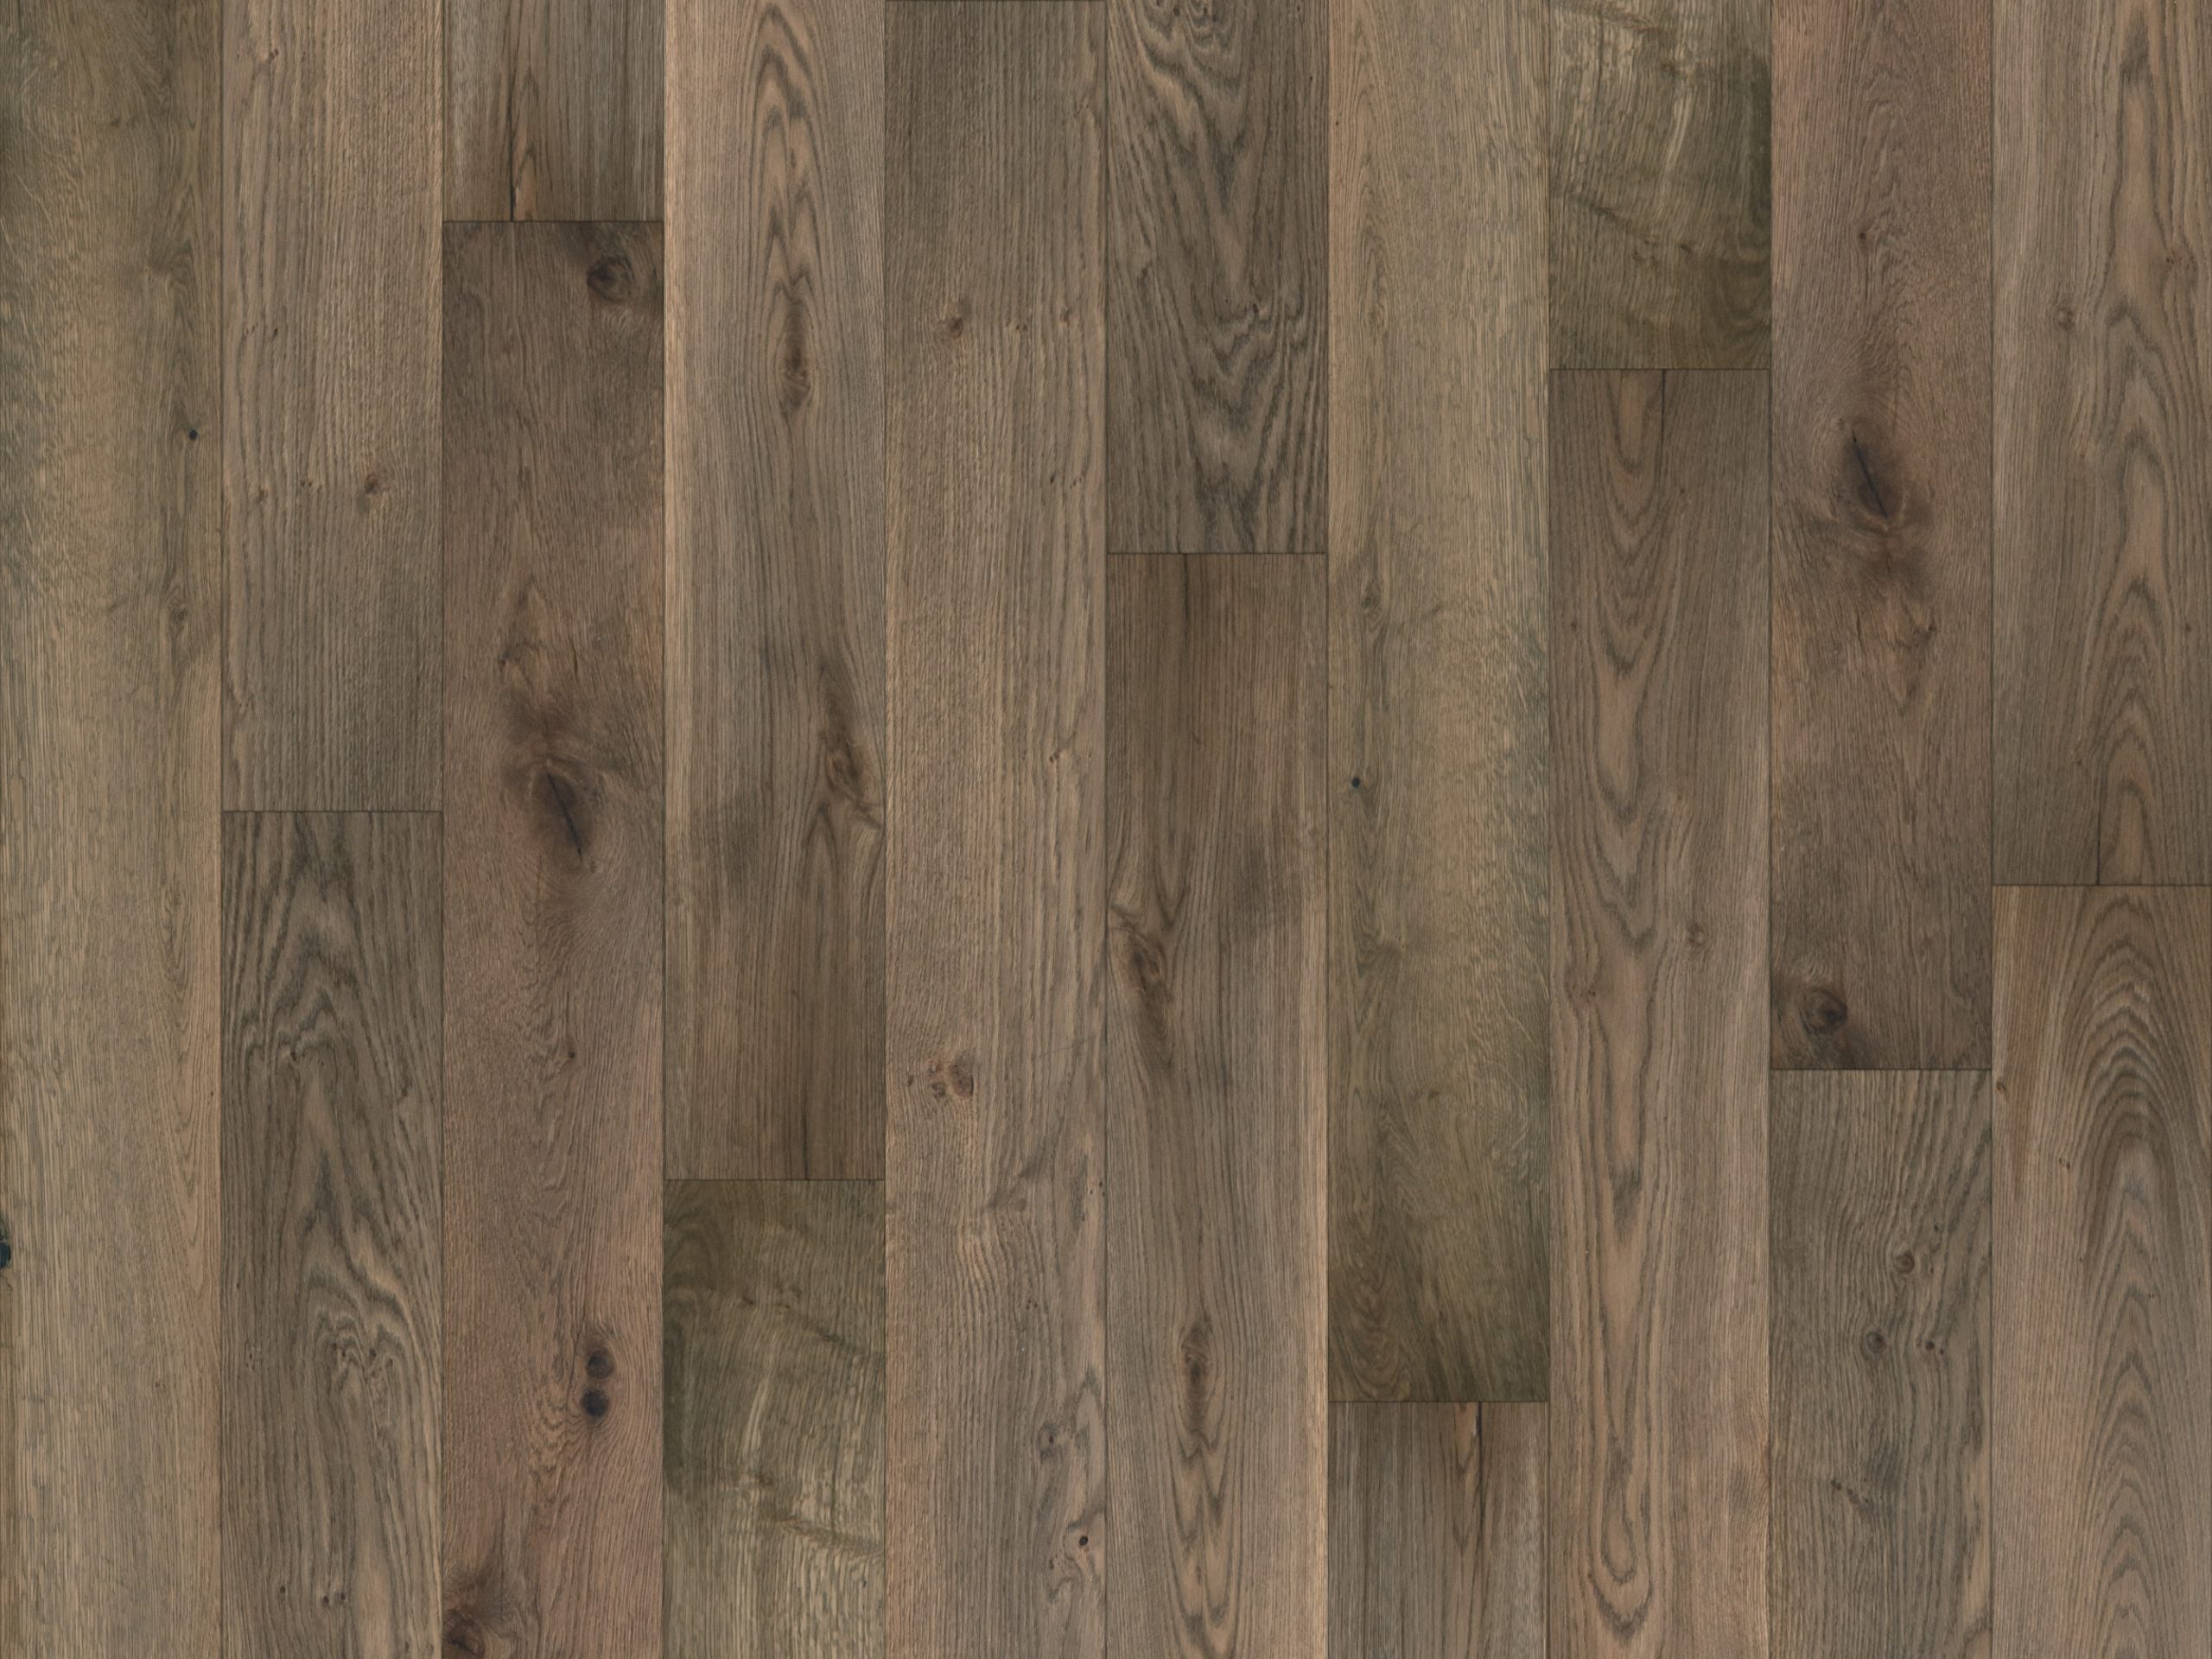 The Guild Lineage Series - Everly - Engineered Hardwood